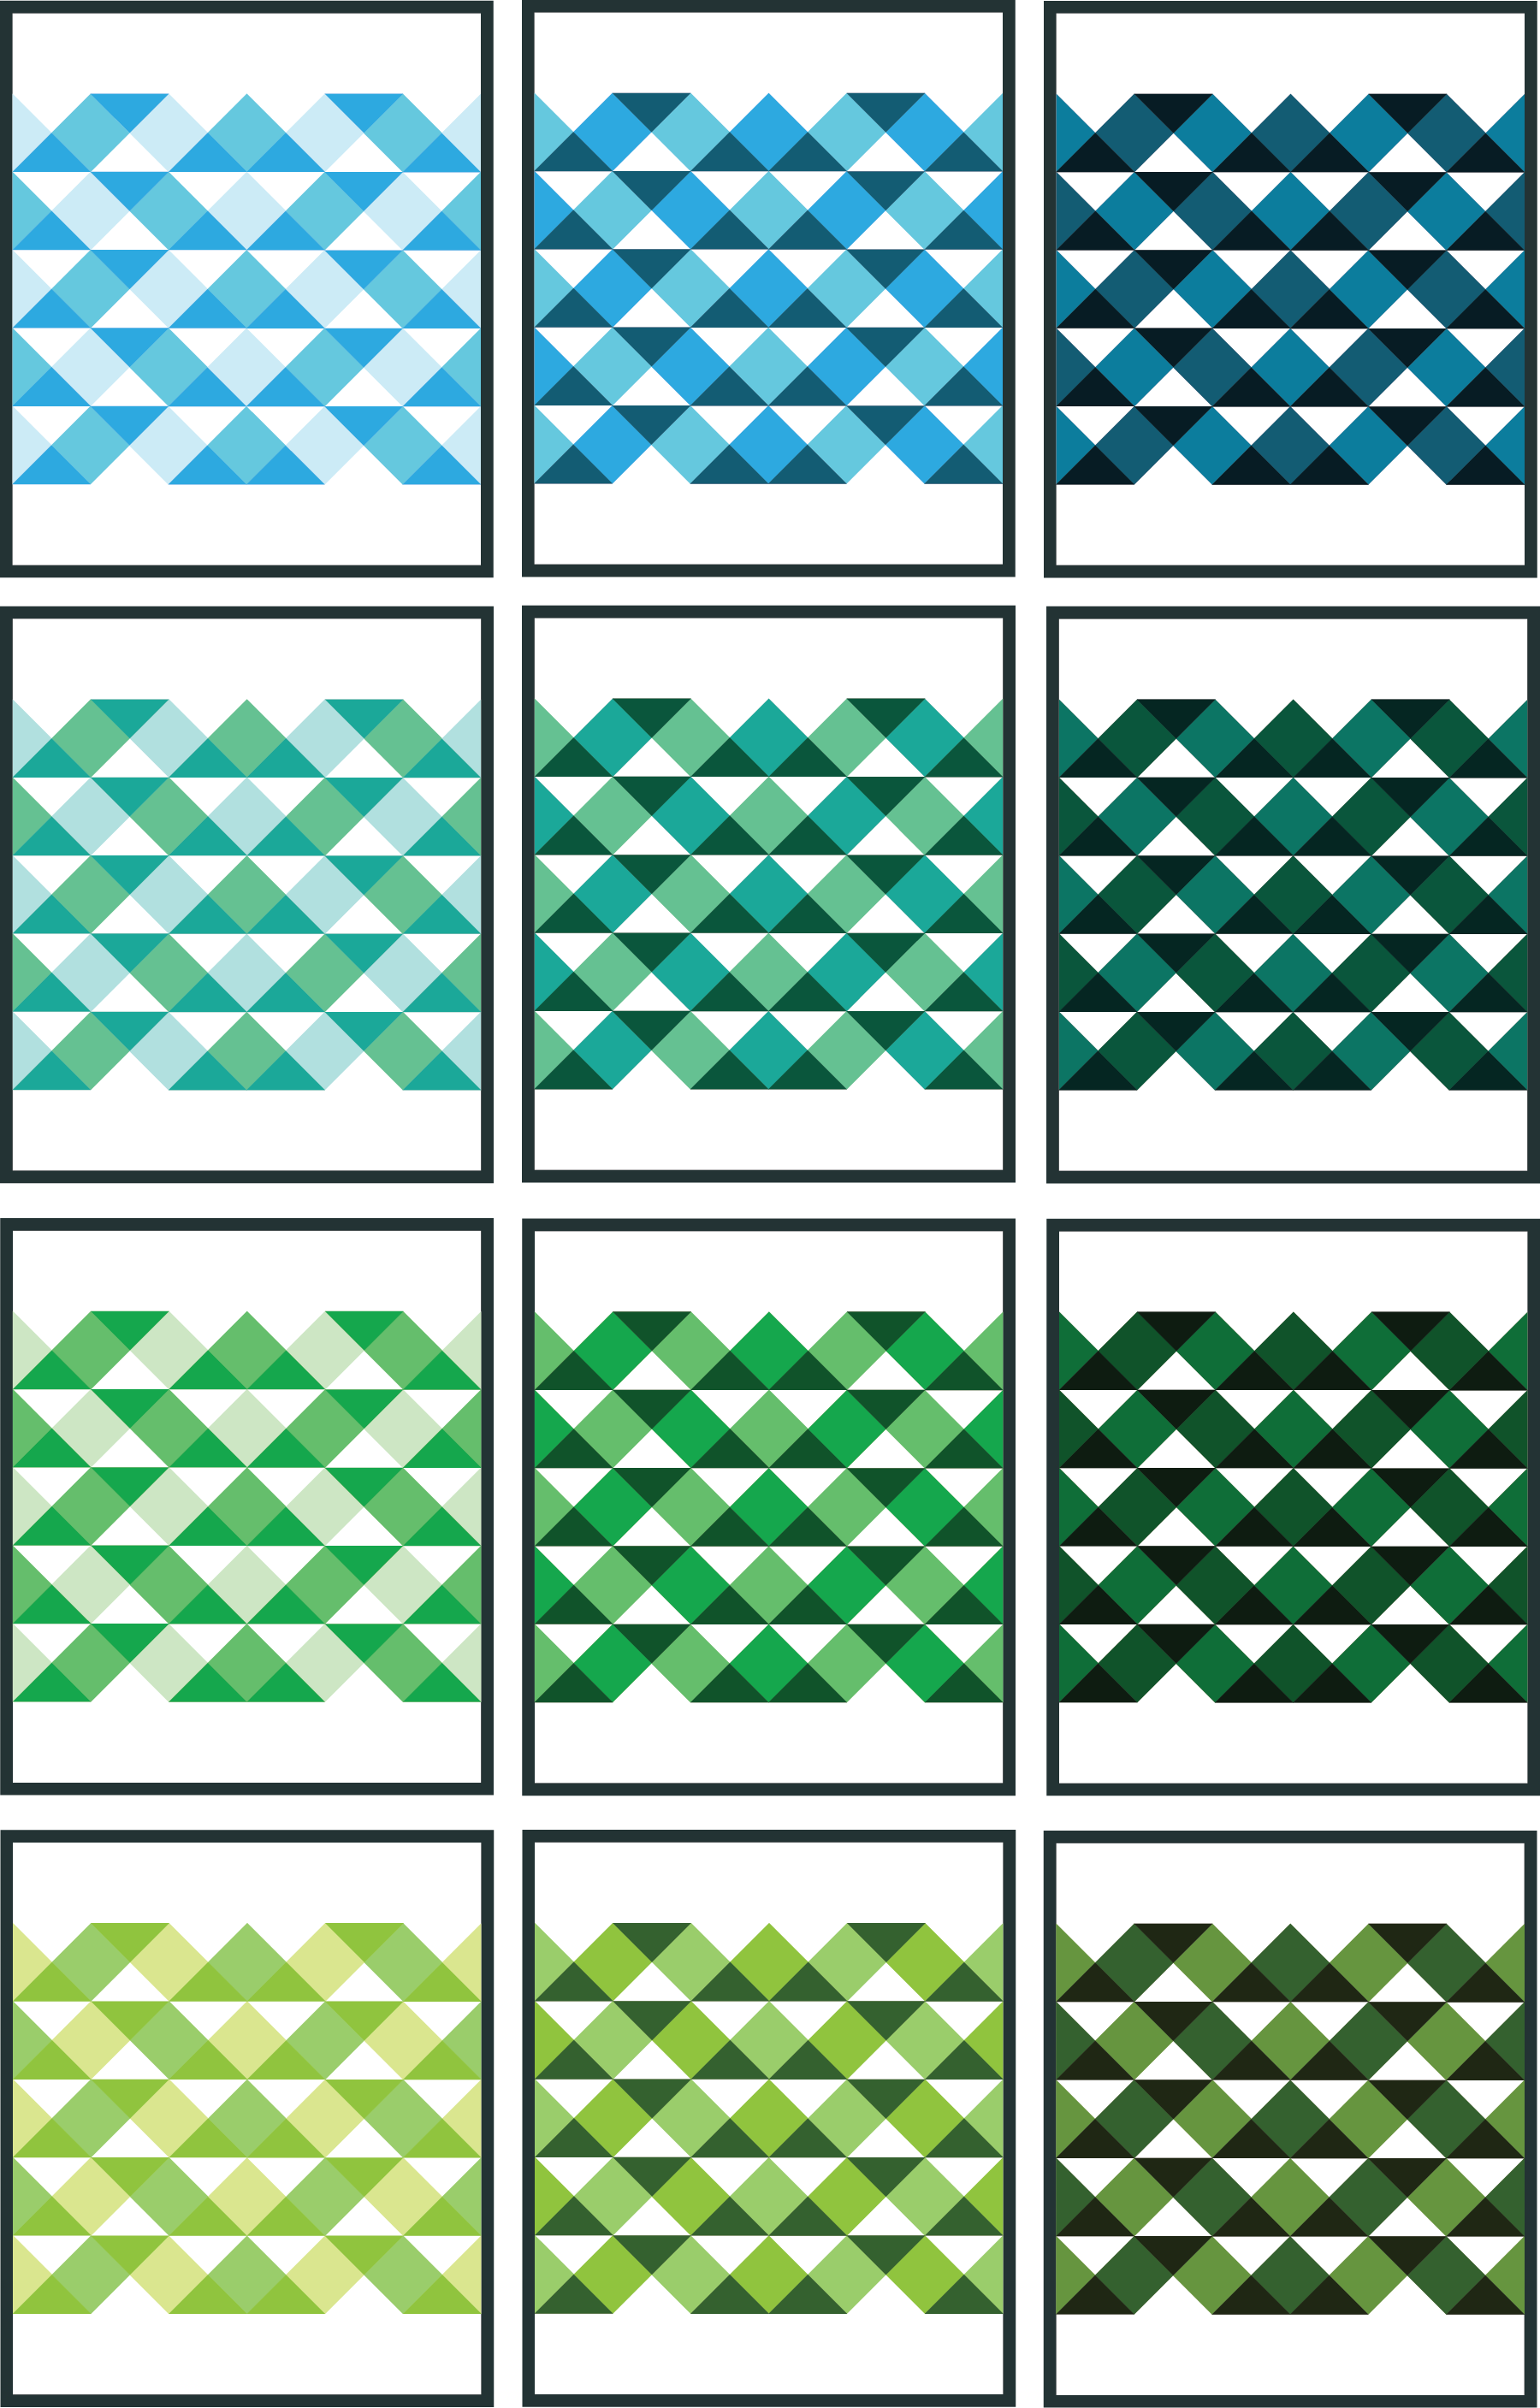 Sea Breeze quilt mockups by Sewfinity